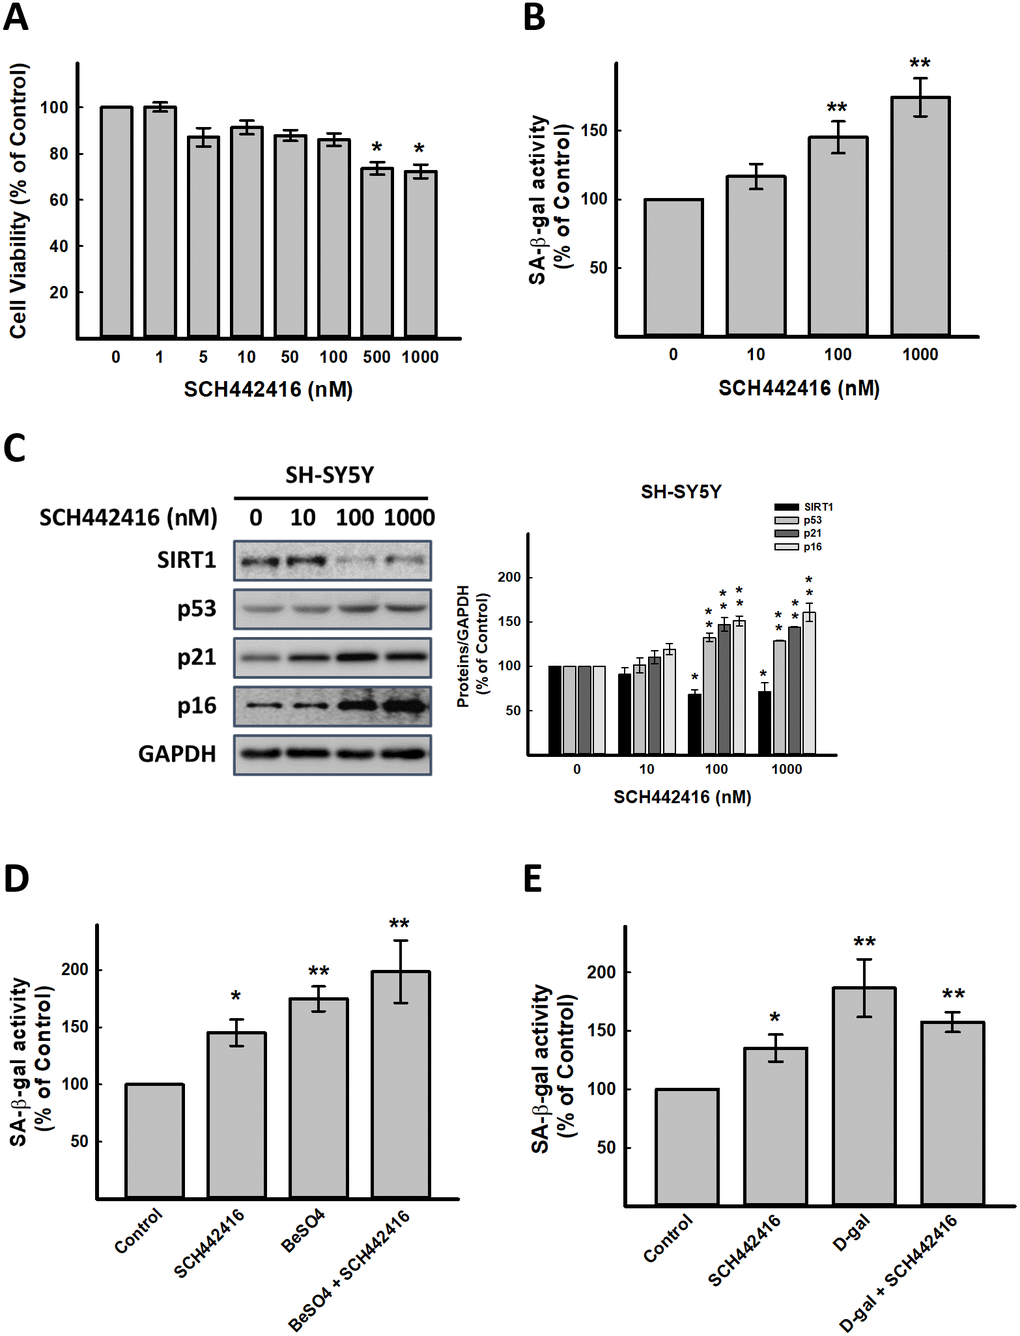 Effect of A2AR antagonist SCH442416 on cellular senescence in vitro. (A) Effect of SCH442416 on cell viability detected by SRB assay. Effect of SCH442416 on cellular senescence detected by (B) cellular senescence markers, SA-β-gal activity and (C) western blot analysis of SCH442416-induced cellular senescence related molecules. Combination test for (D) SCH442416 and BeSO4 as well as (E) SCH442416 and D-gal detected by cellular senescence markers, SA-β-gal activity. Data are mean±SEM from at least four independent experiments. Significant difference between control and treated cells is indicated by *p p 